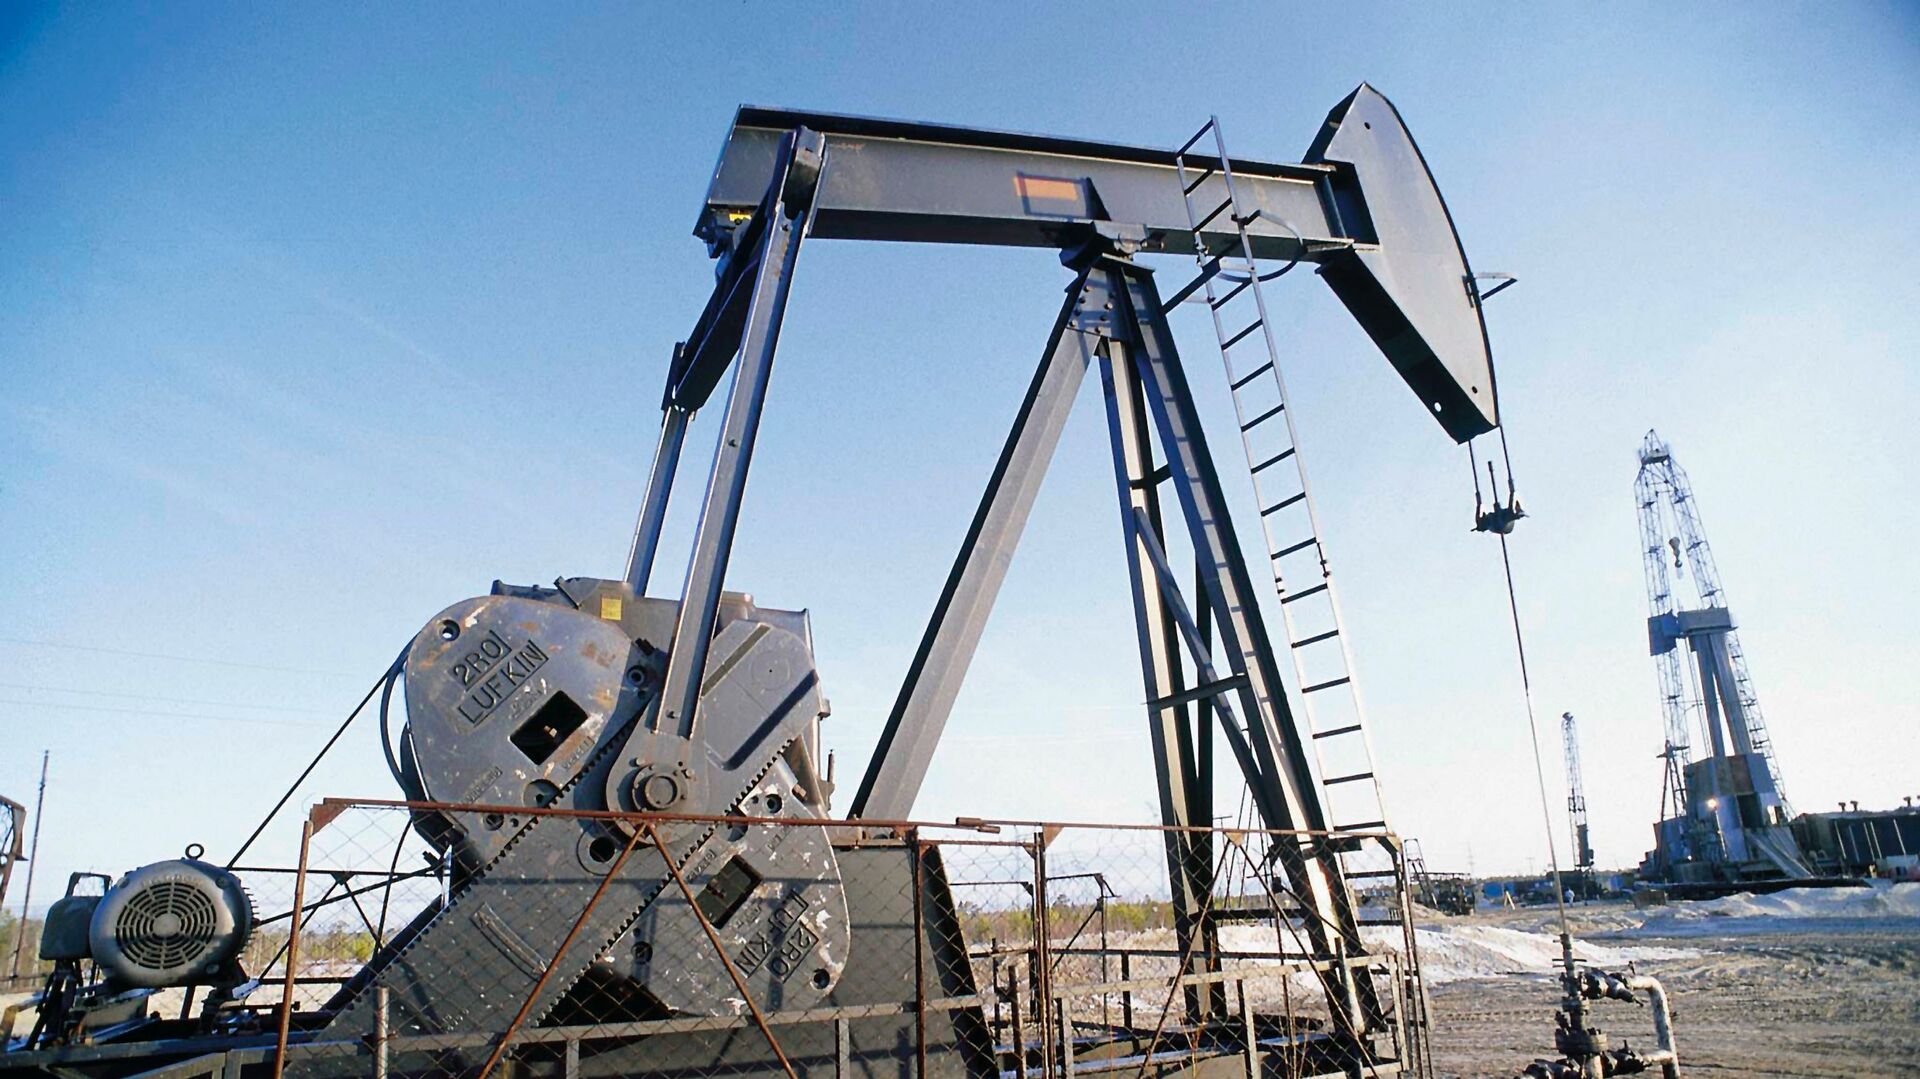 The prices of West Texas Intermediate (WTI), the US oil benchmark, and Brent crude, the global oil benchmark, hit record lows not seen since April 2009 on Tuesday. - Sputnik Азербайджан, 1920, 15.03.2023